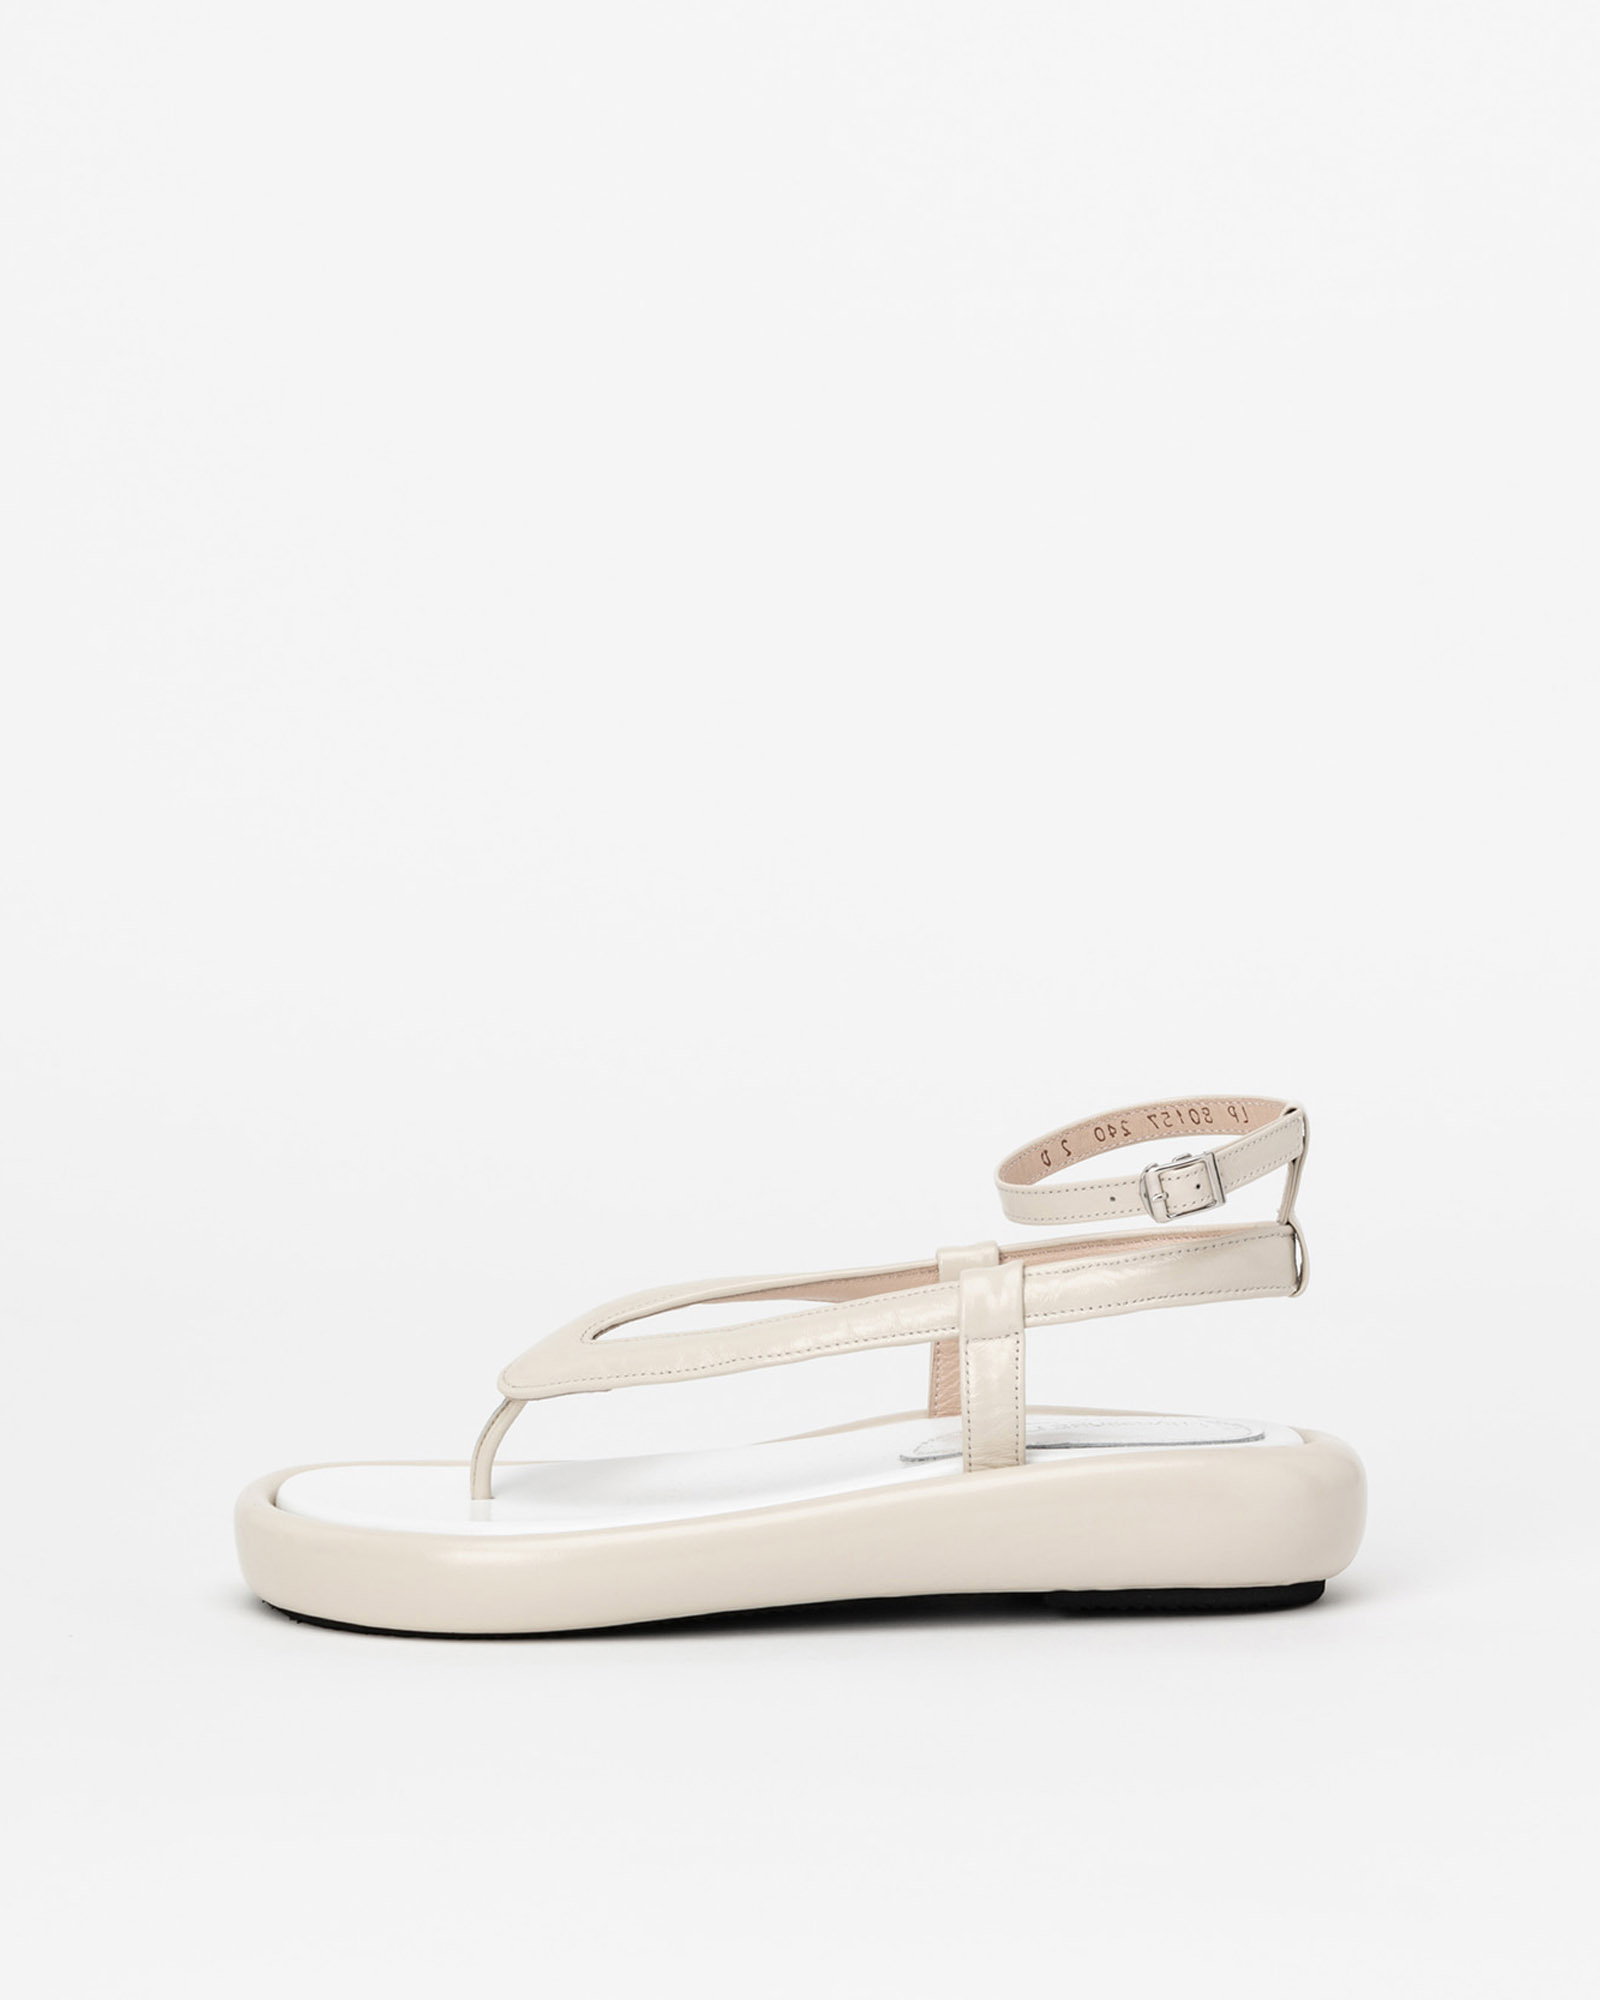 Trambol Footbed Sandals in Wrinkled Ivory with Wrinkled White